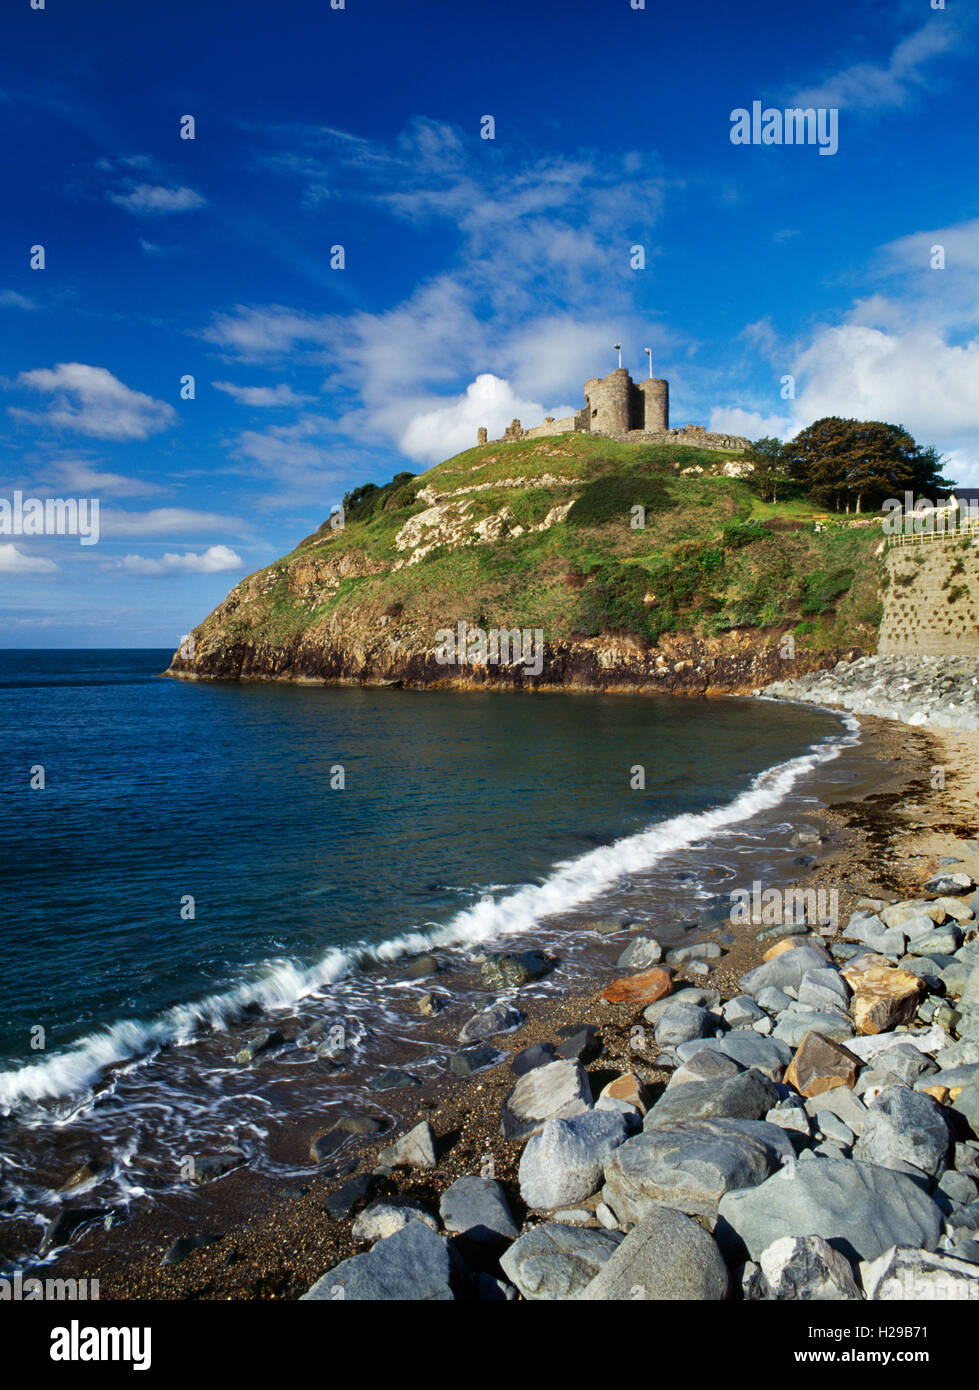 View from jetty of Criccieth Castle & headland: built c1230 by Llywelyn the Great, added to by Llywelyn the Last, Edward I & II. Stock Photo